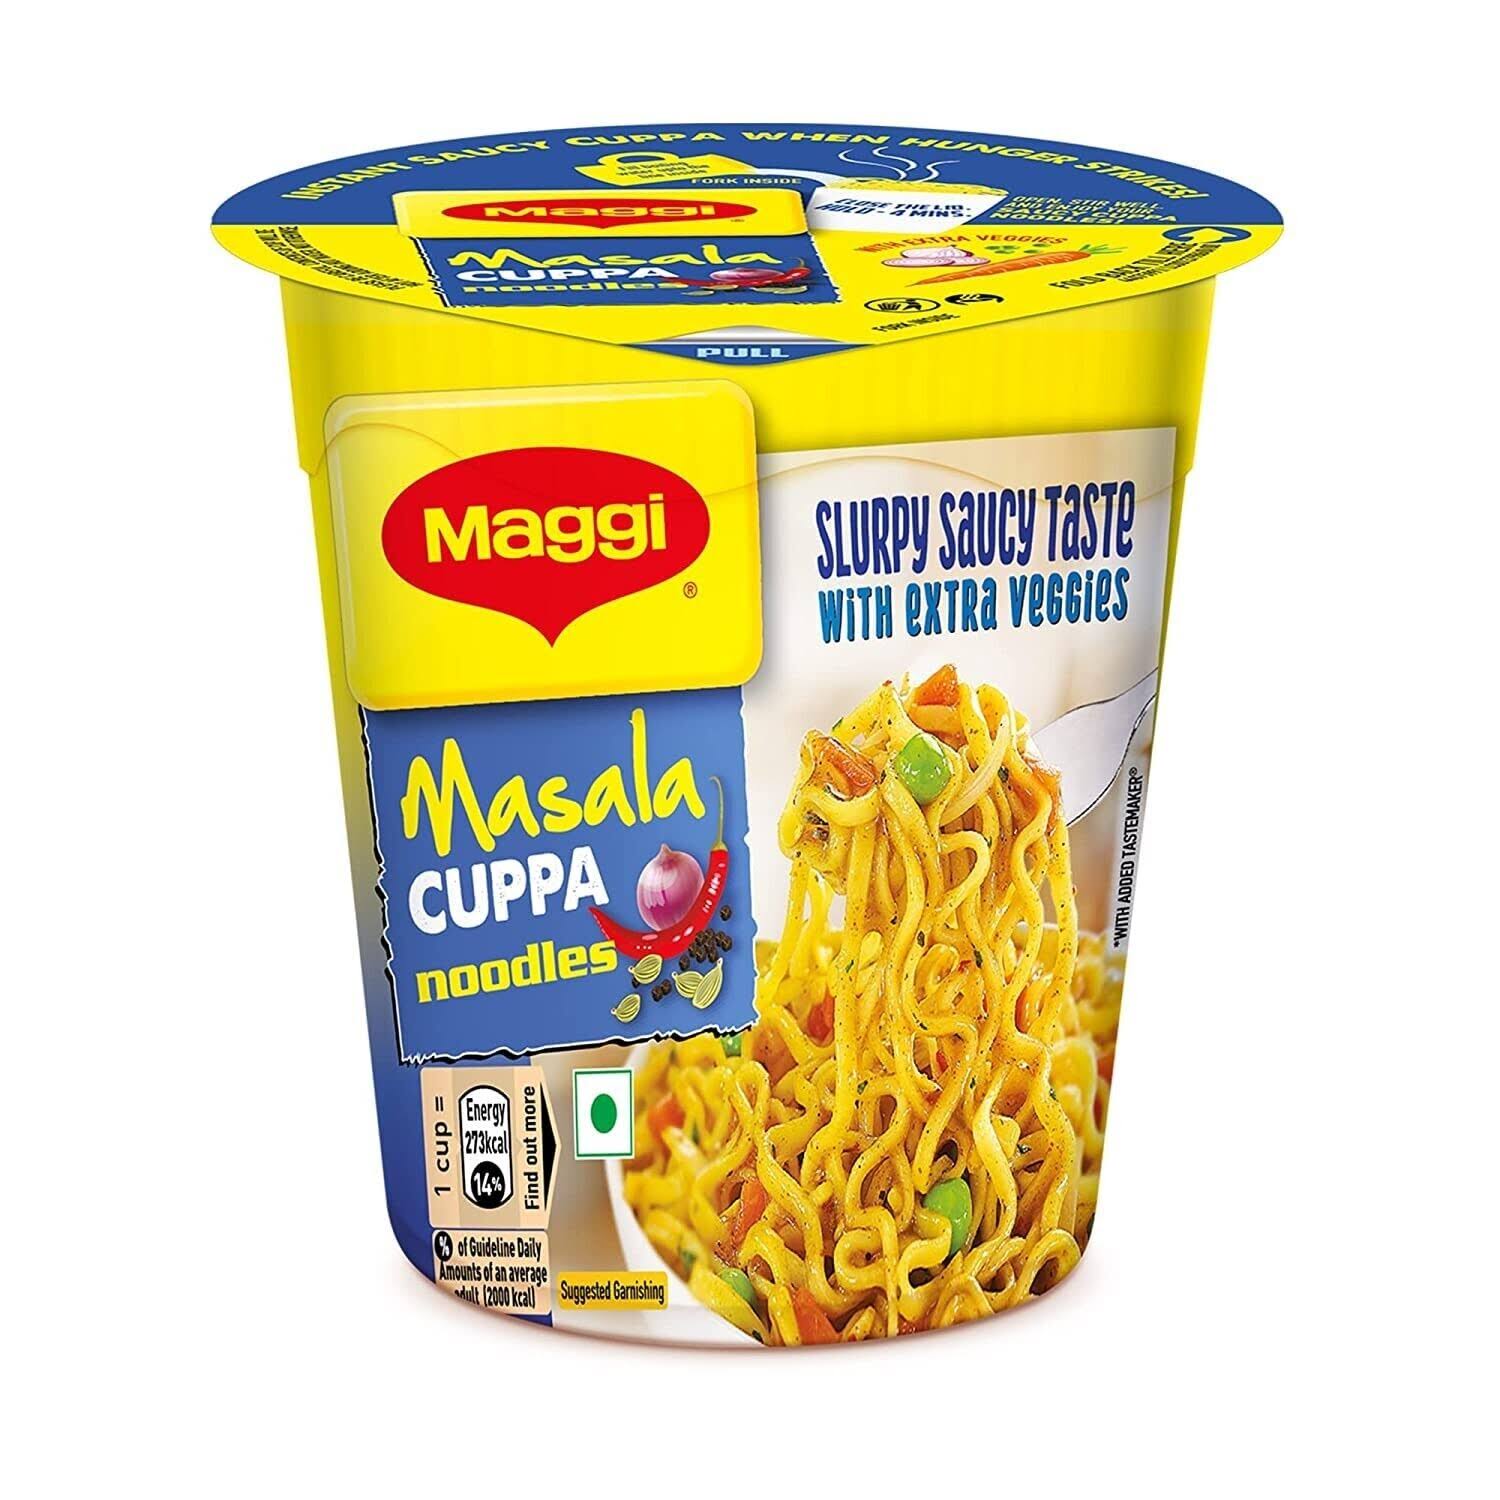 MAGGI Cuppa Noodles - Masala, Instant On-The-Go Snacks, 70 g